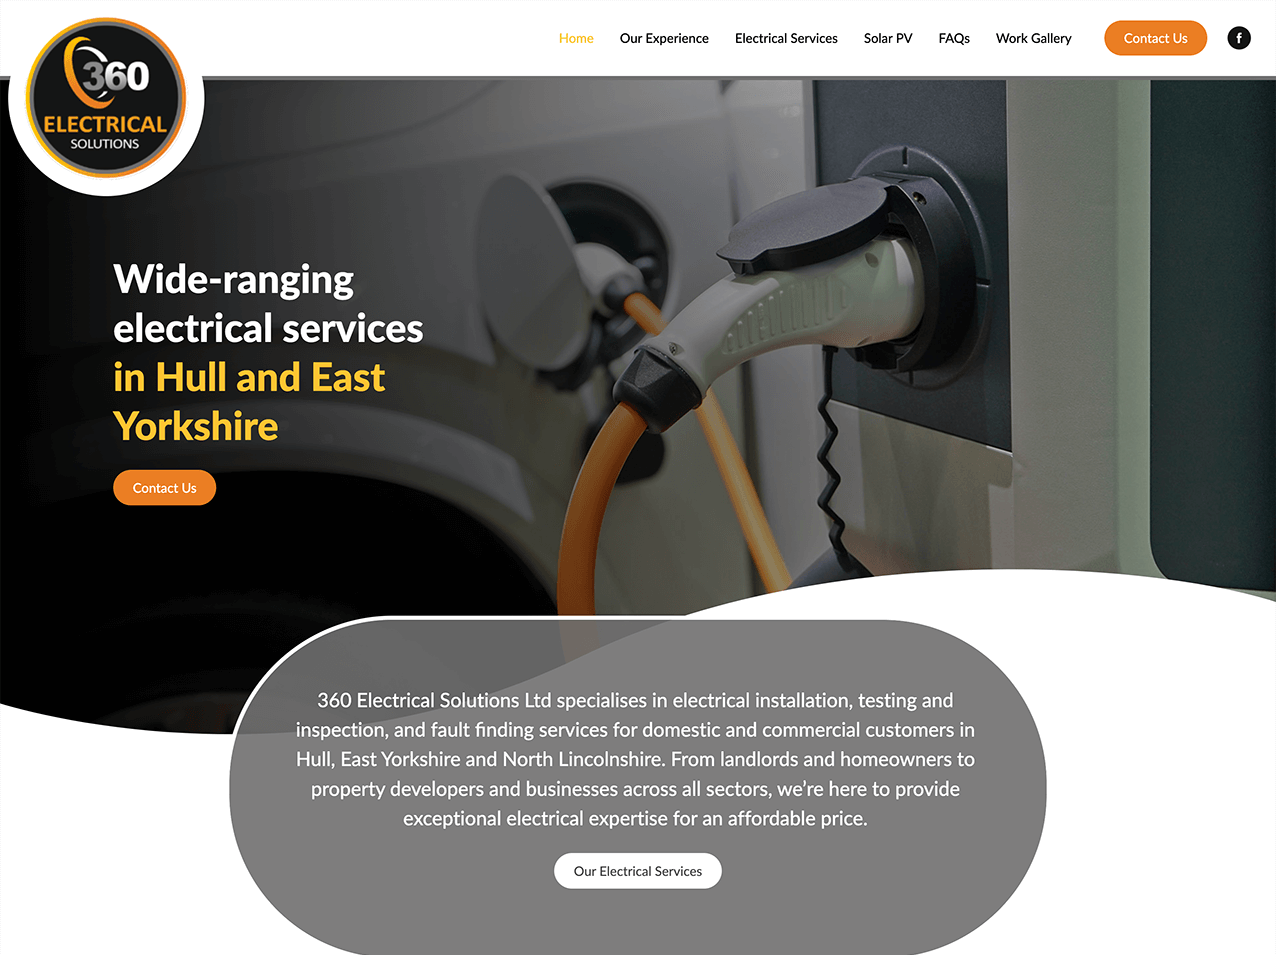 360 electrical solutions website